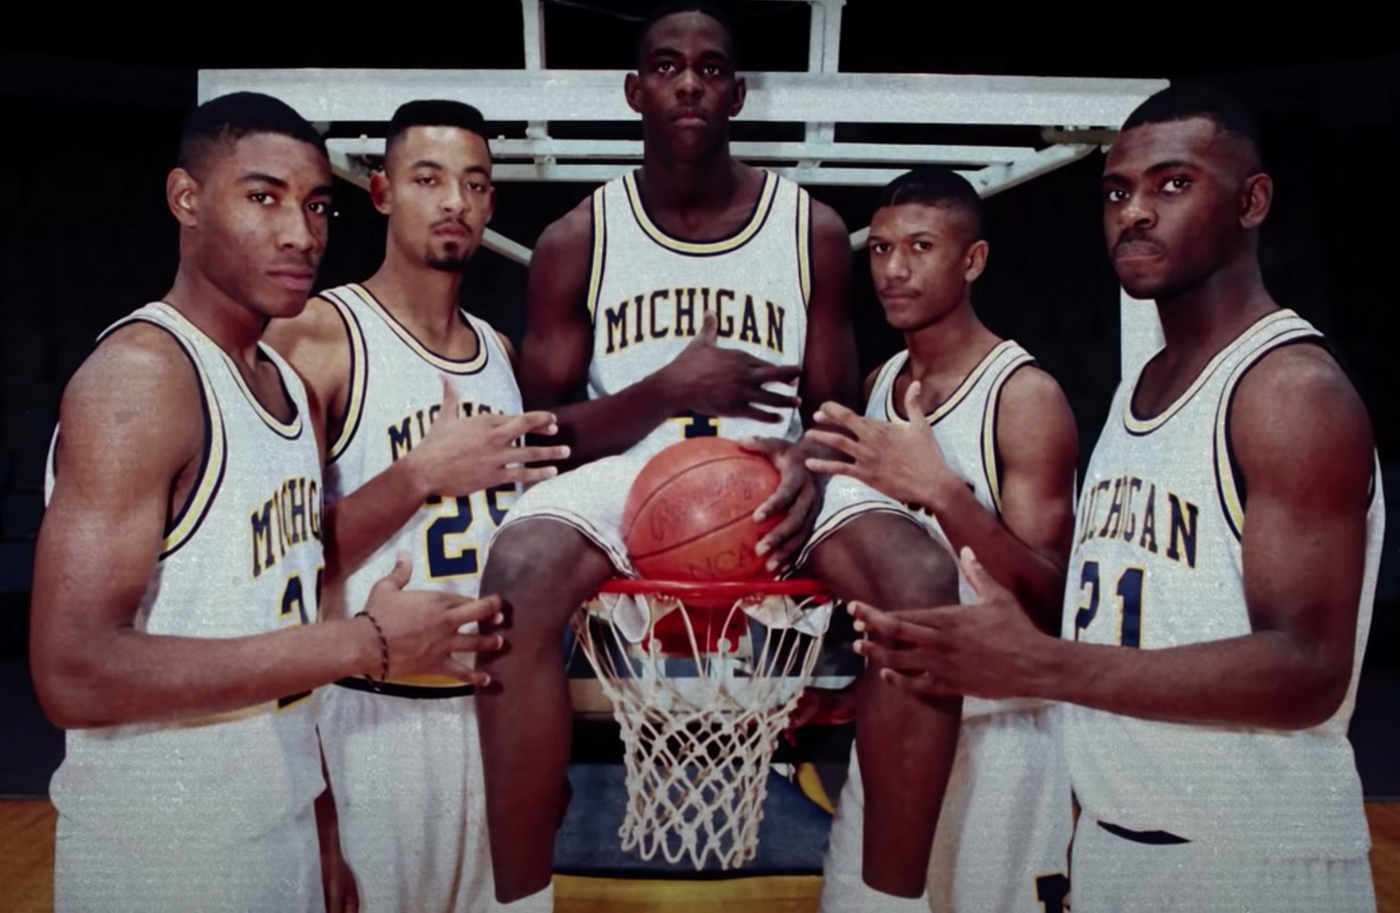 The Continued Saga of Chris Webber and The Fab Five